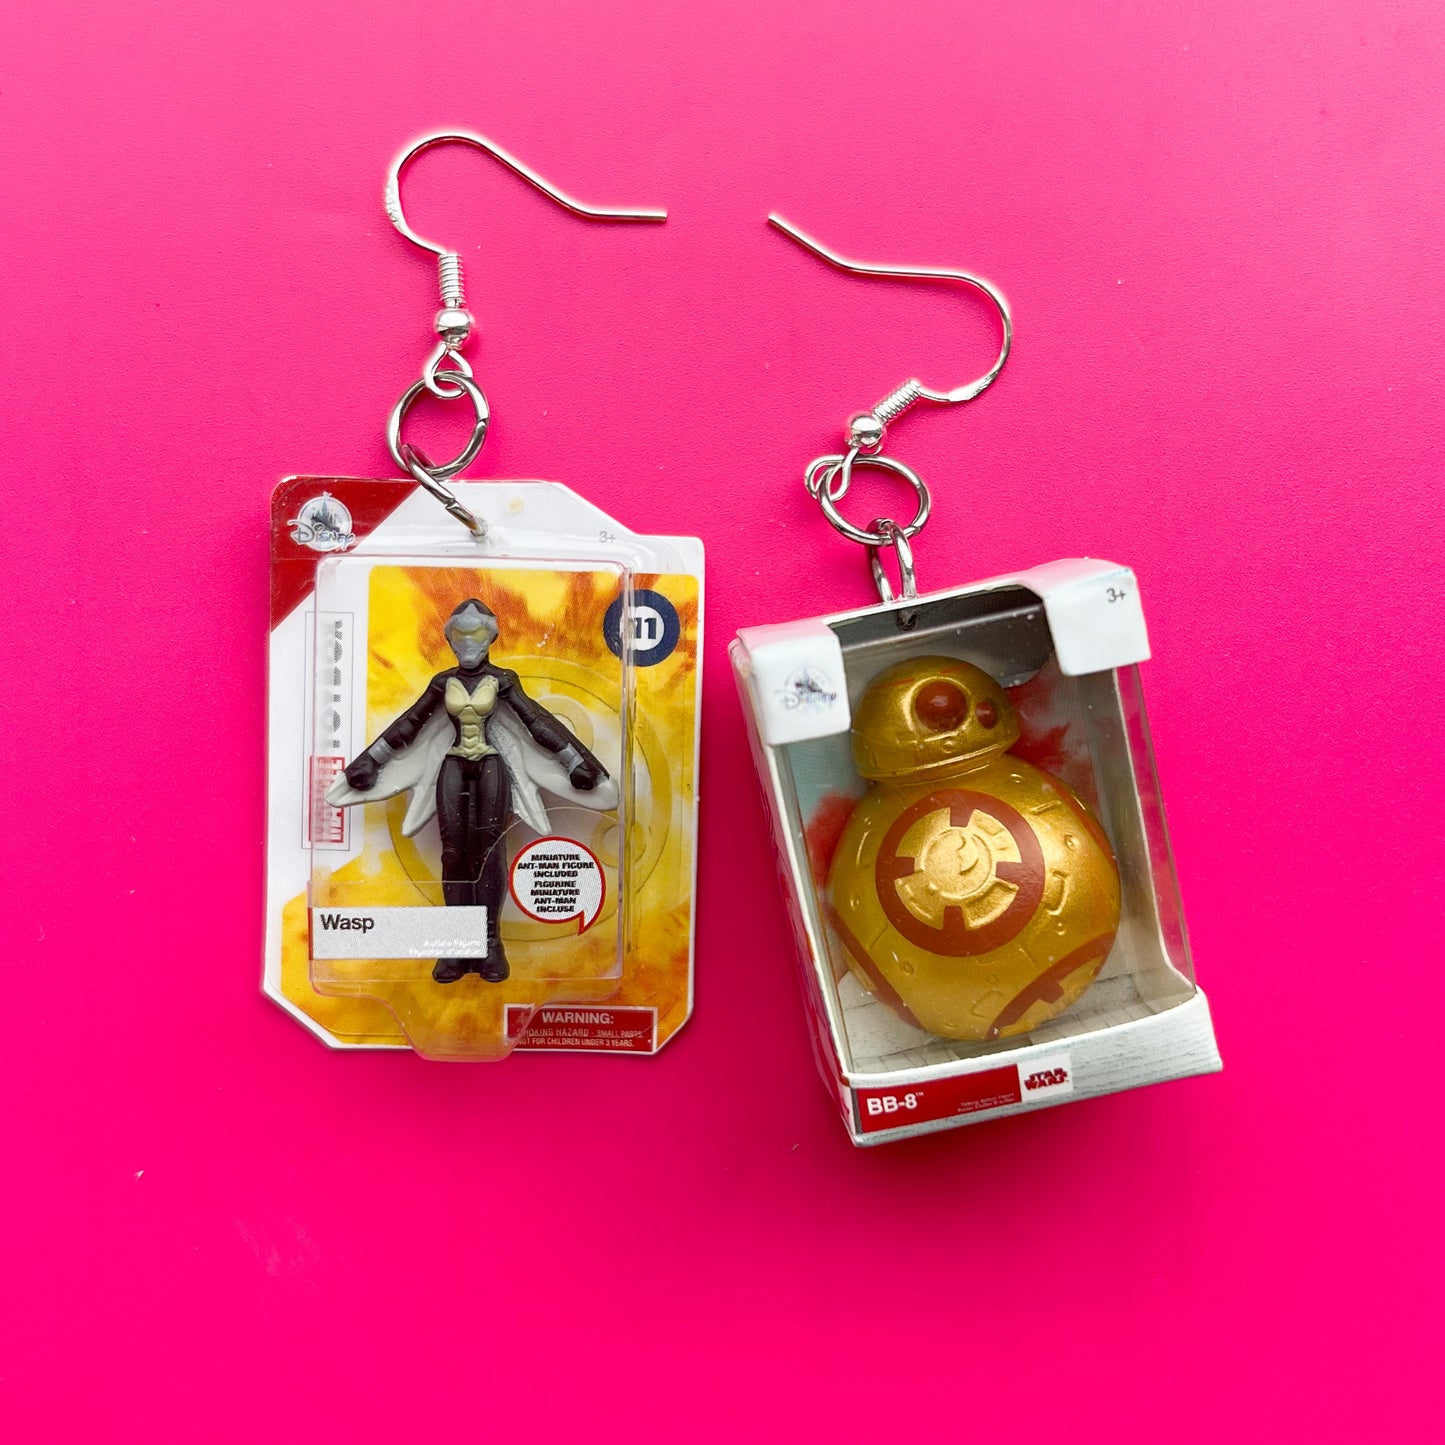 Wasp and BB-8 Earrings